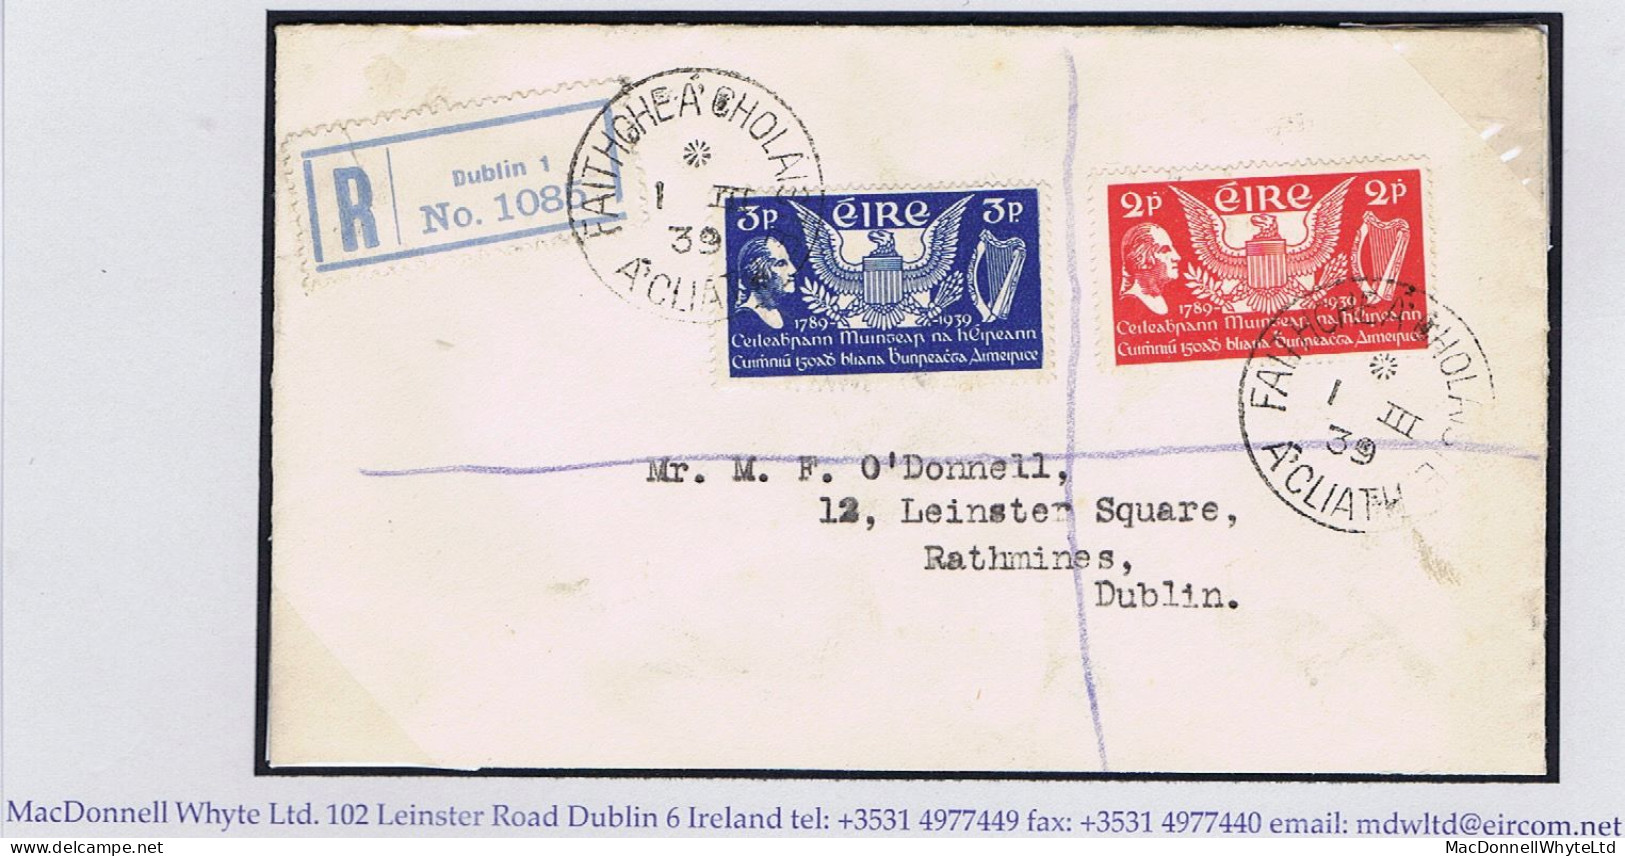 Ireland 1939 US Constitution Set On Registered First Day Cover College Green Dublin Cds 1 III 39 - FDC